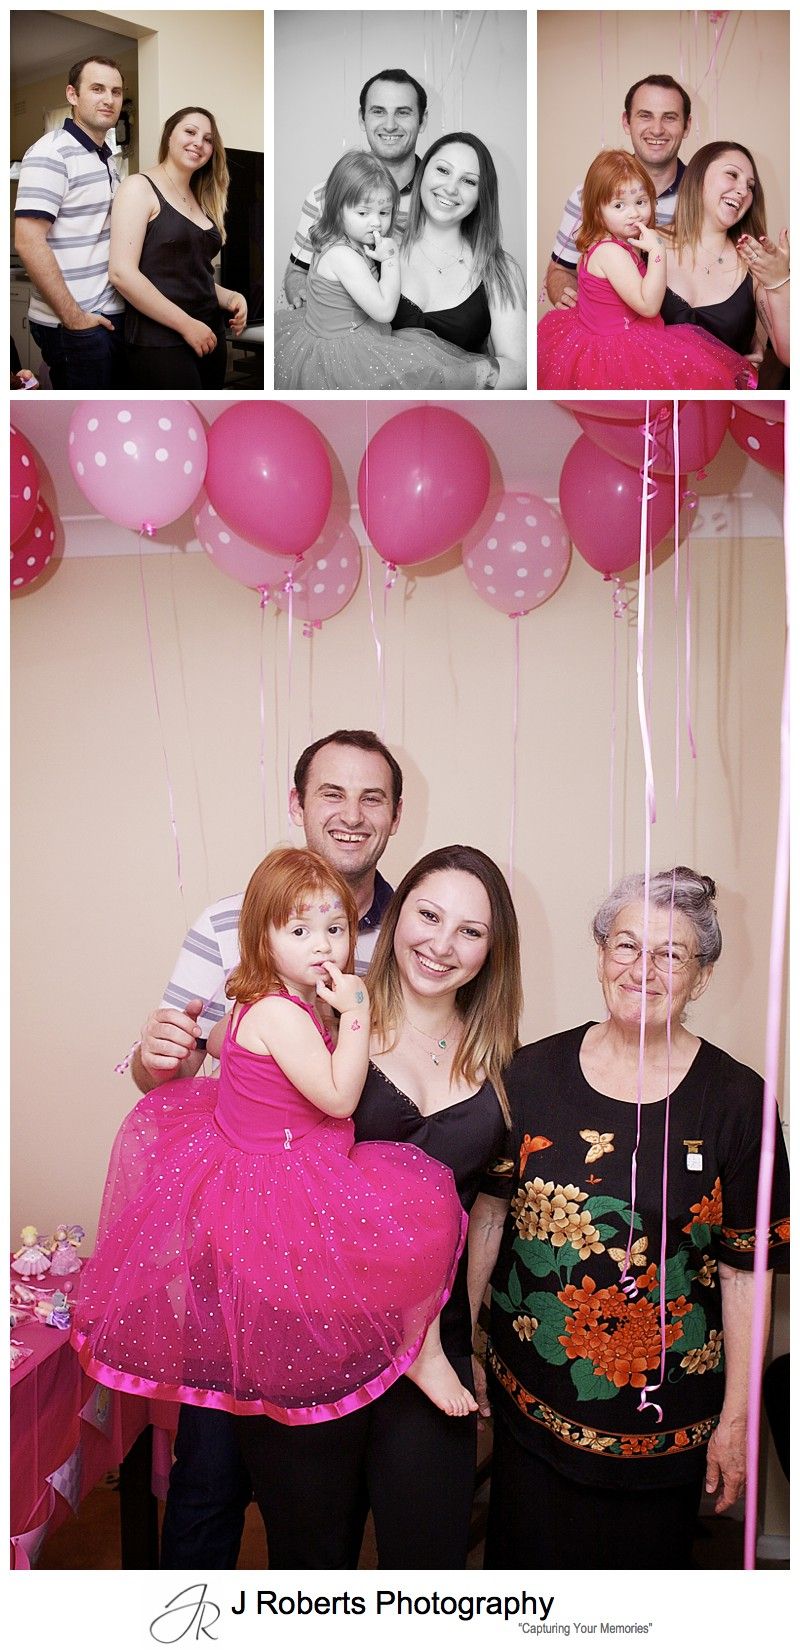 Family portraits at 3 year old girls birthday party - sydney party photography